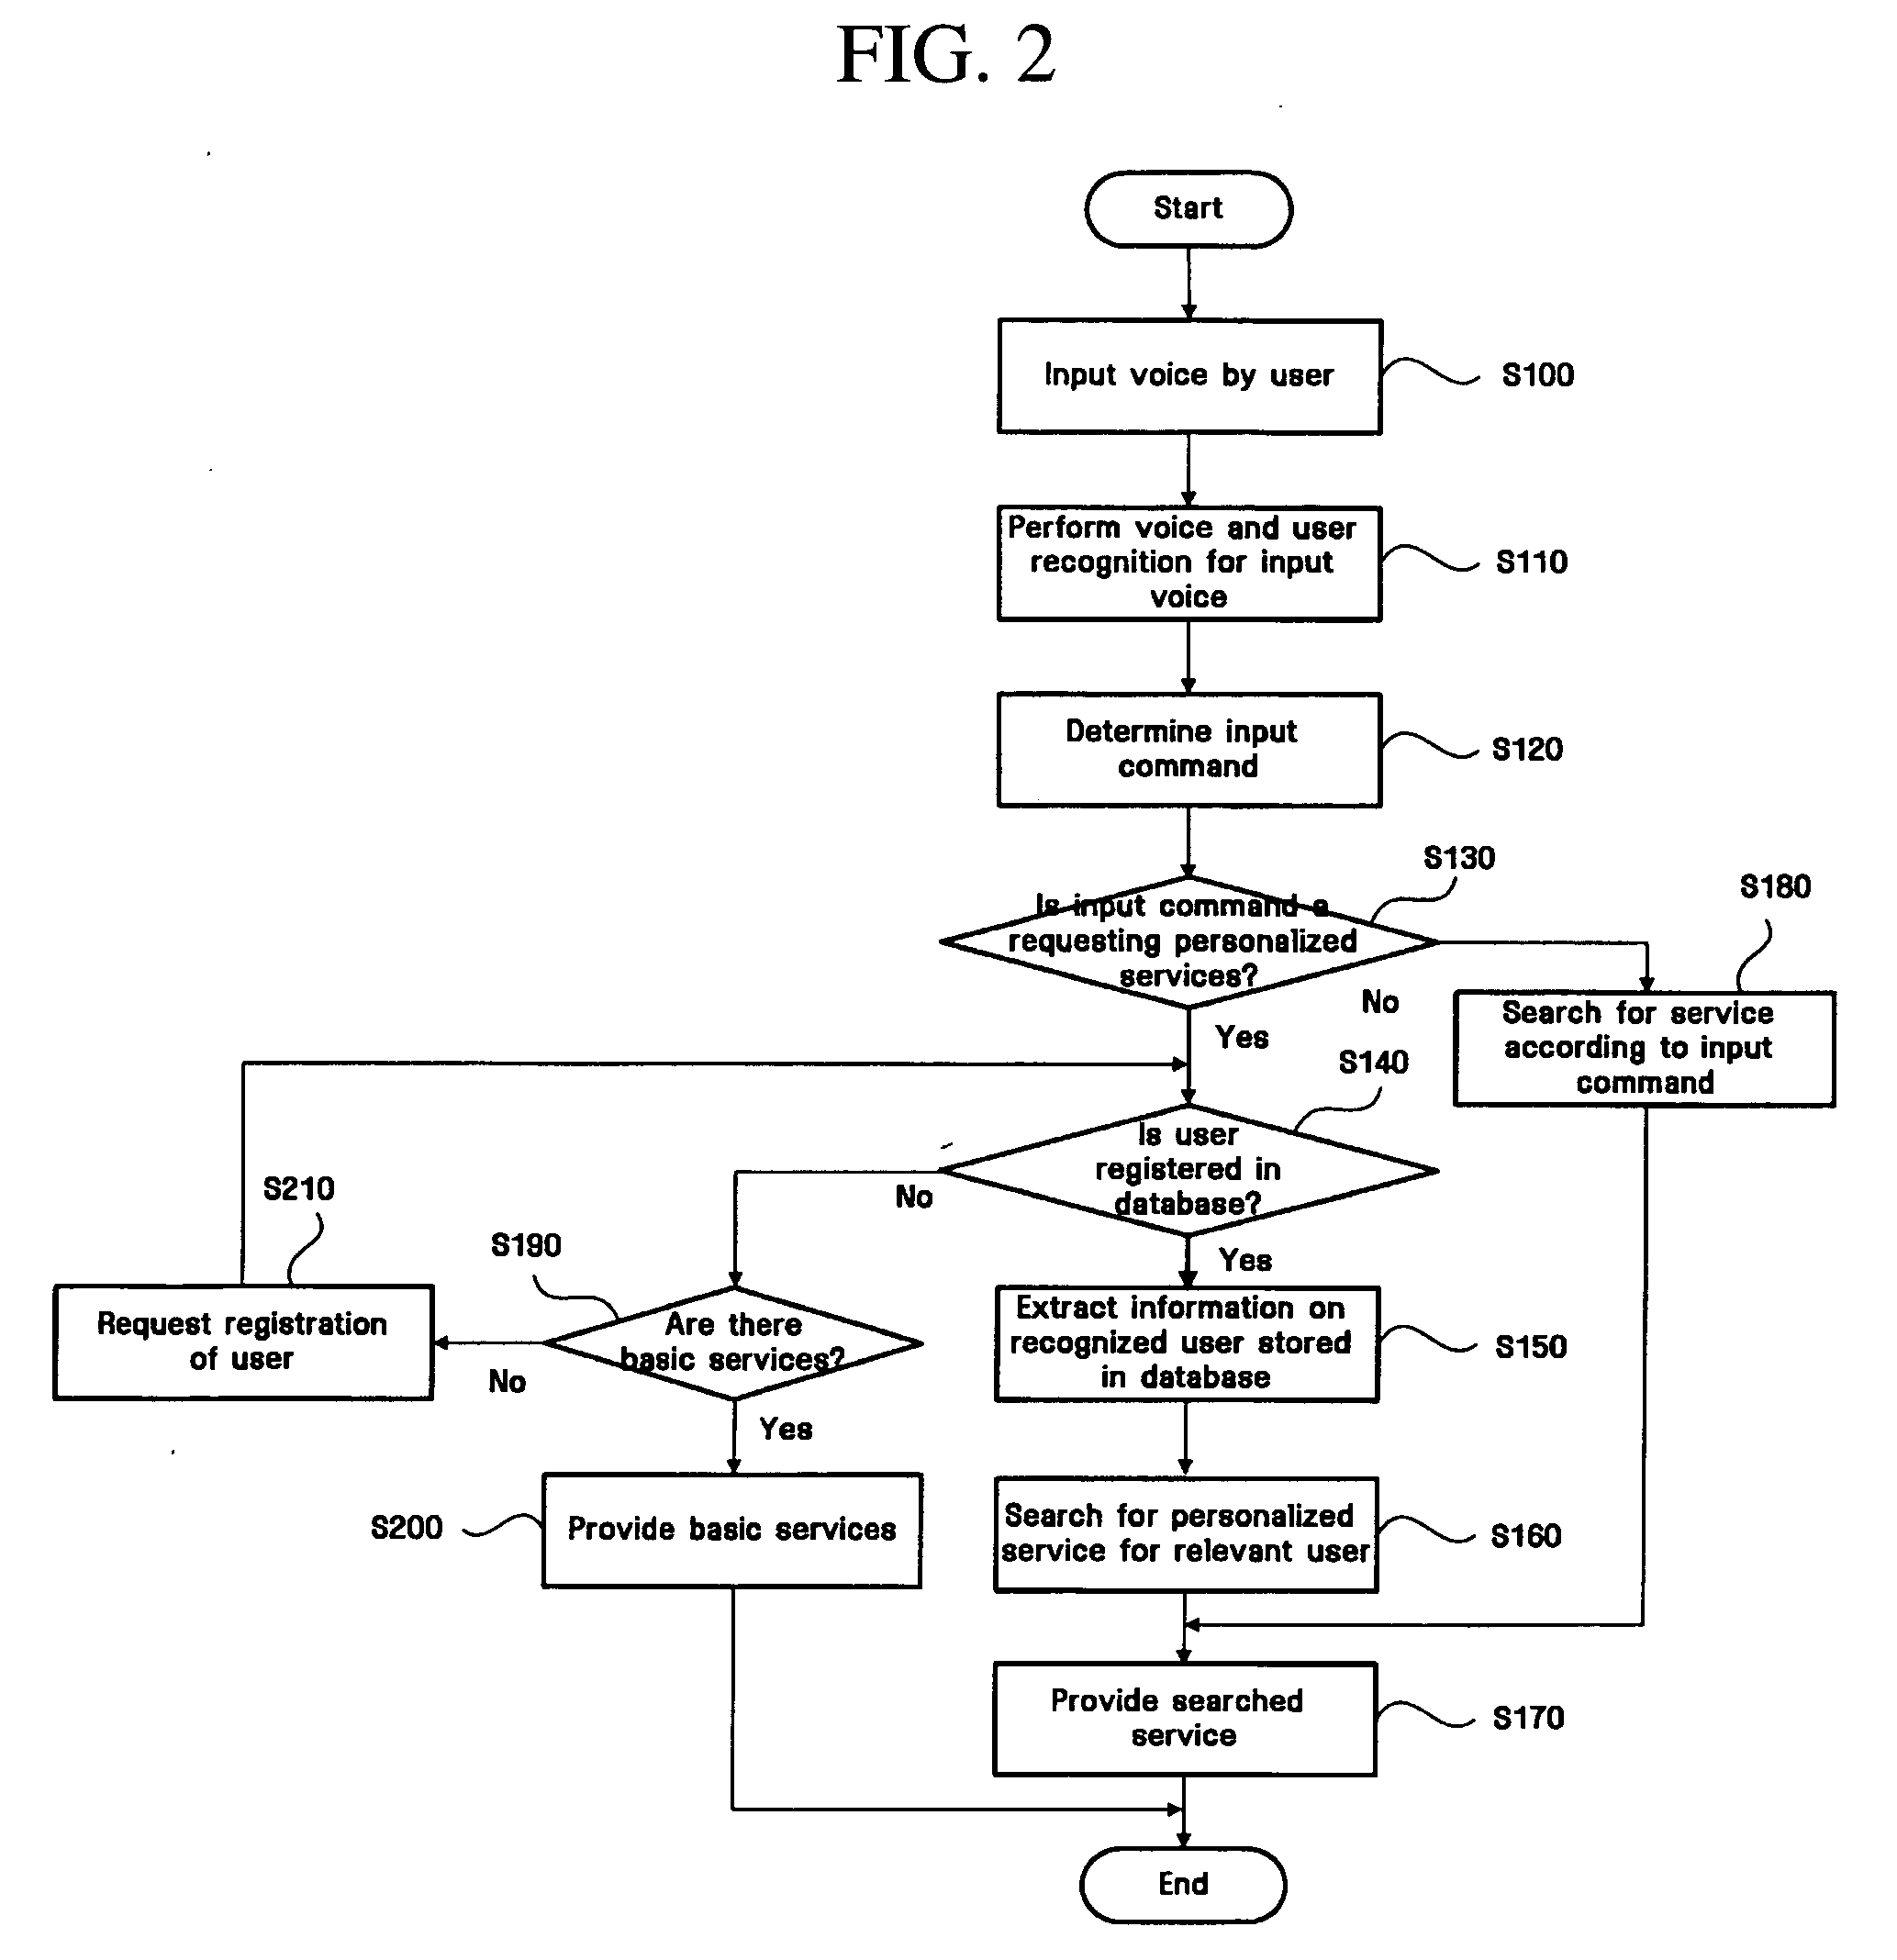 Audio/video apparatus and method for providing personalized services through voice and speaker recognition